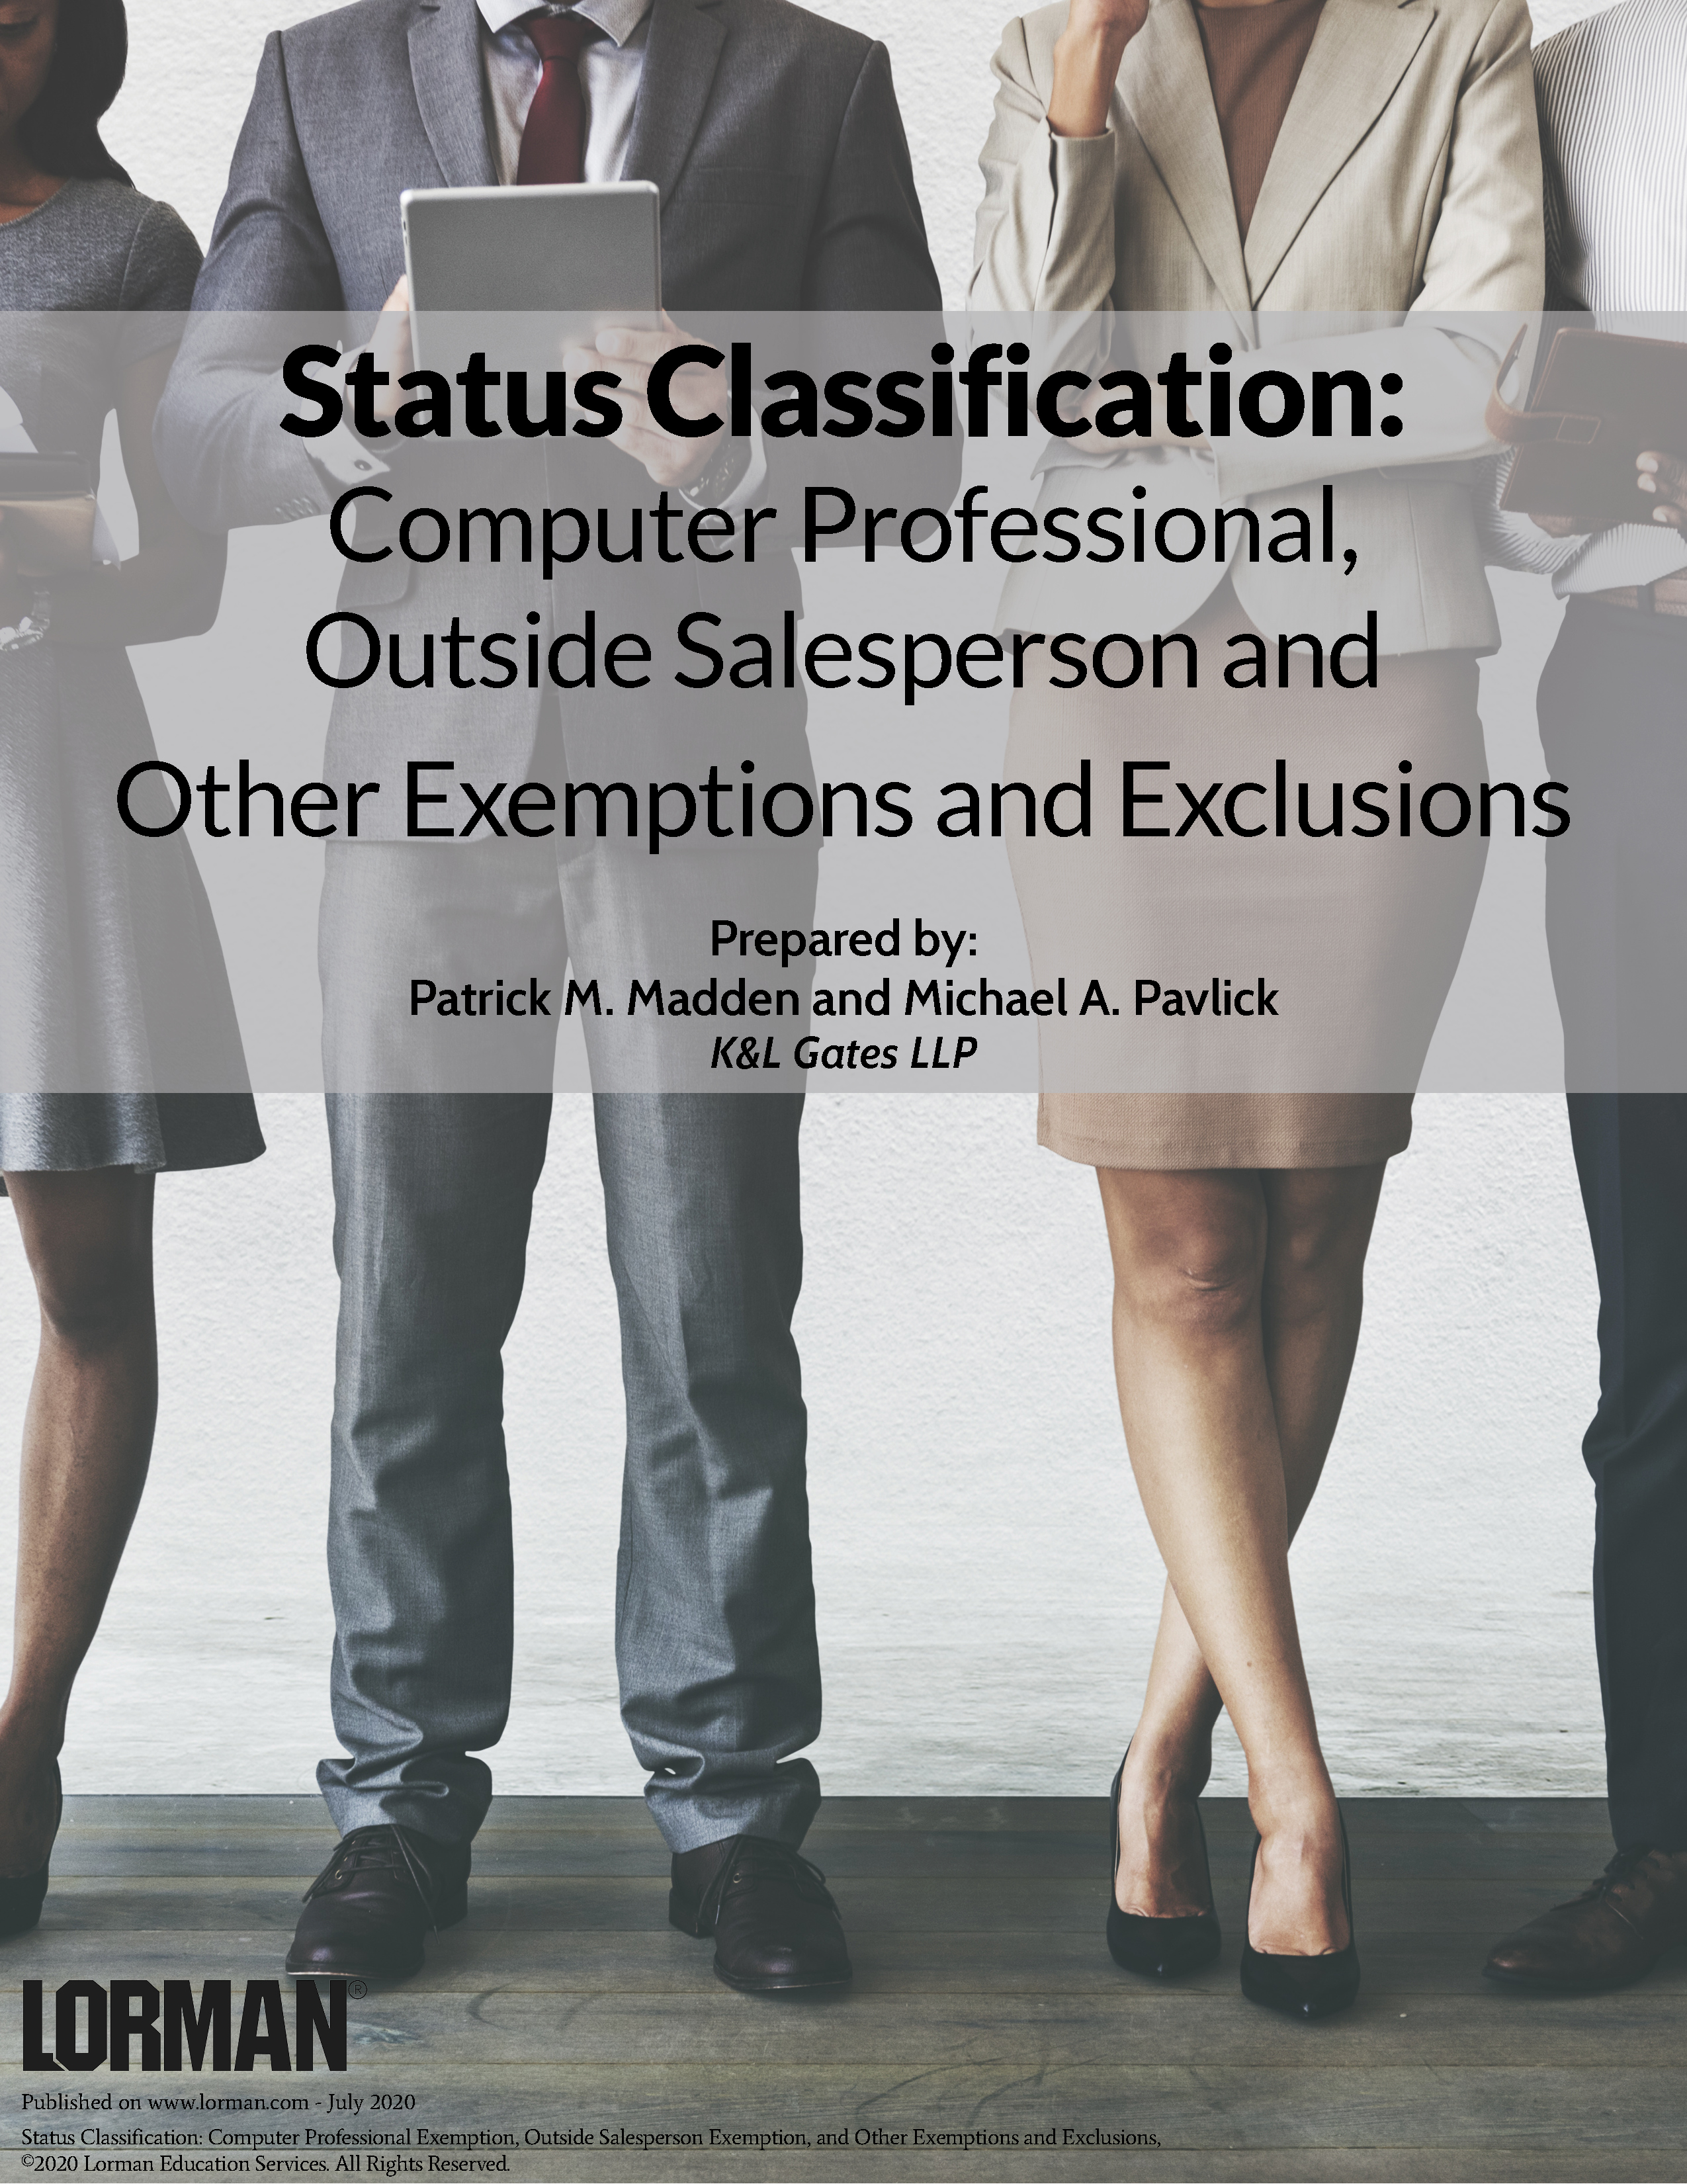 Status Classification: Computer Professional, Outside Salesperson & Other Exemptions & Exclusions